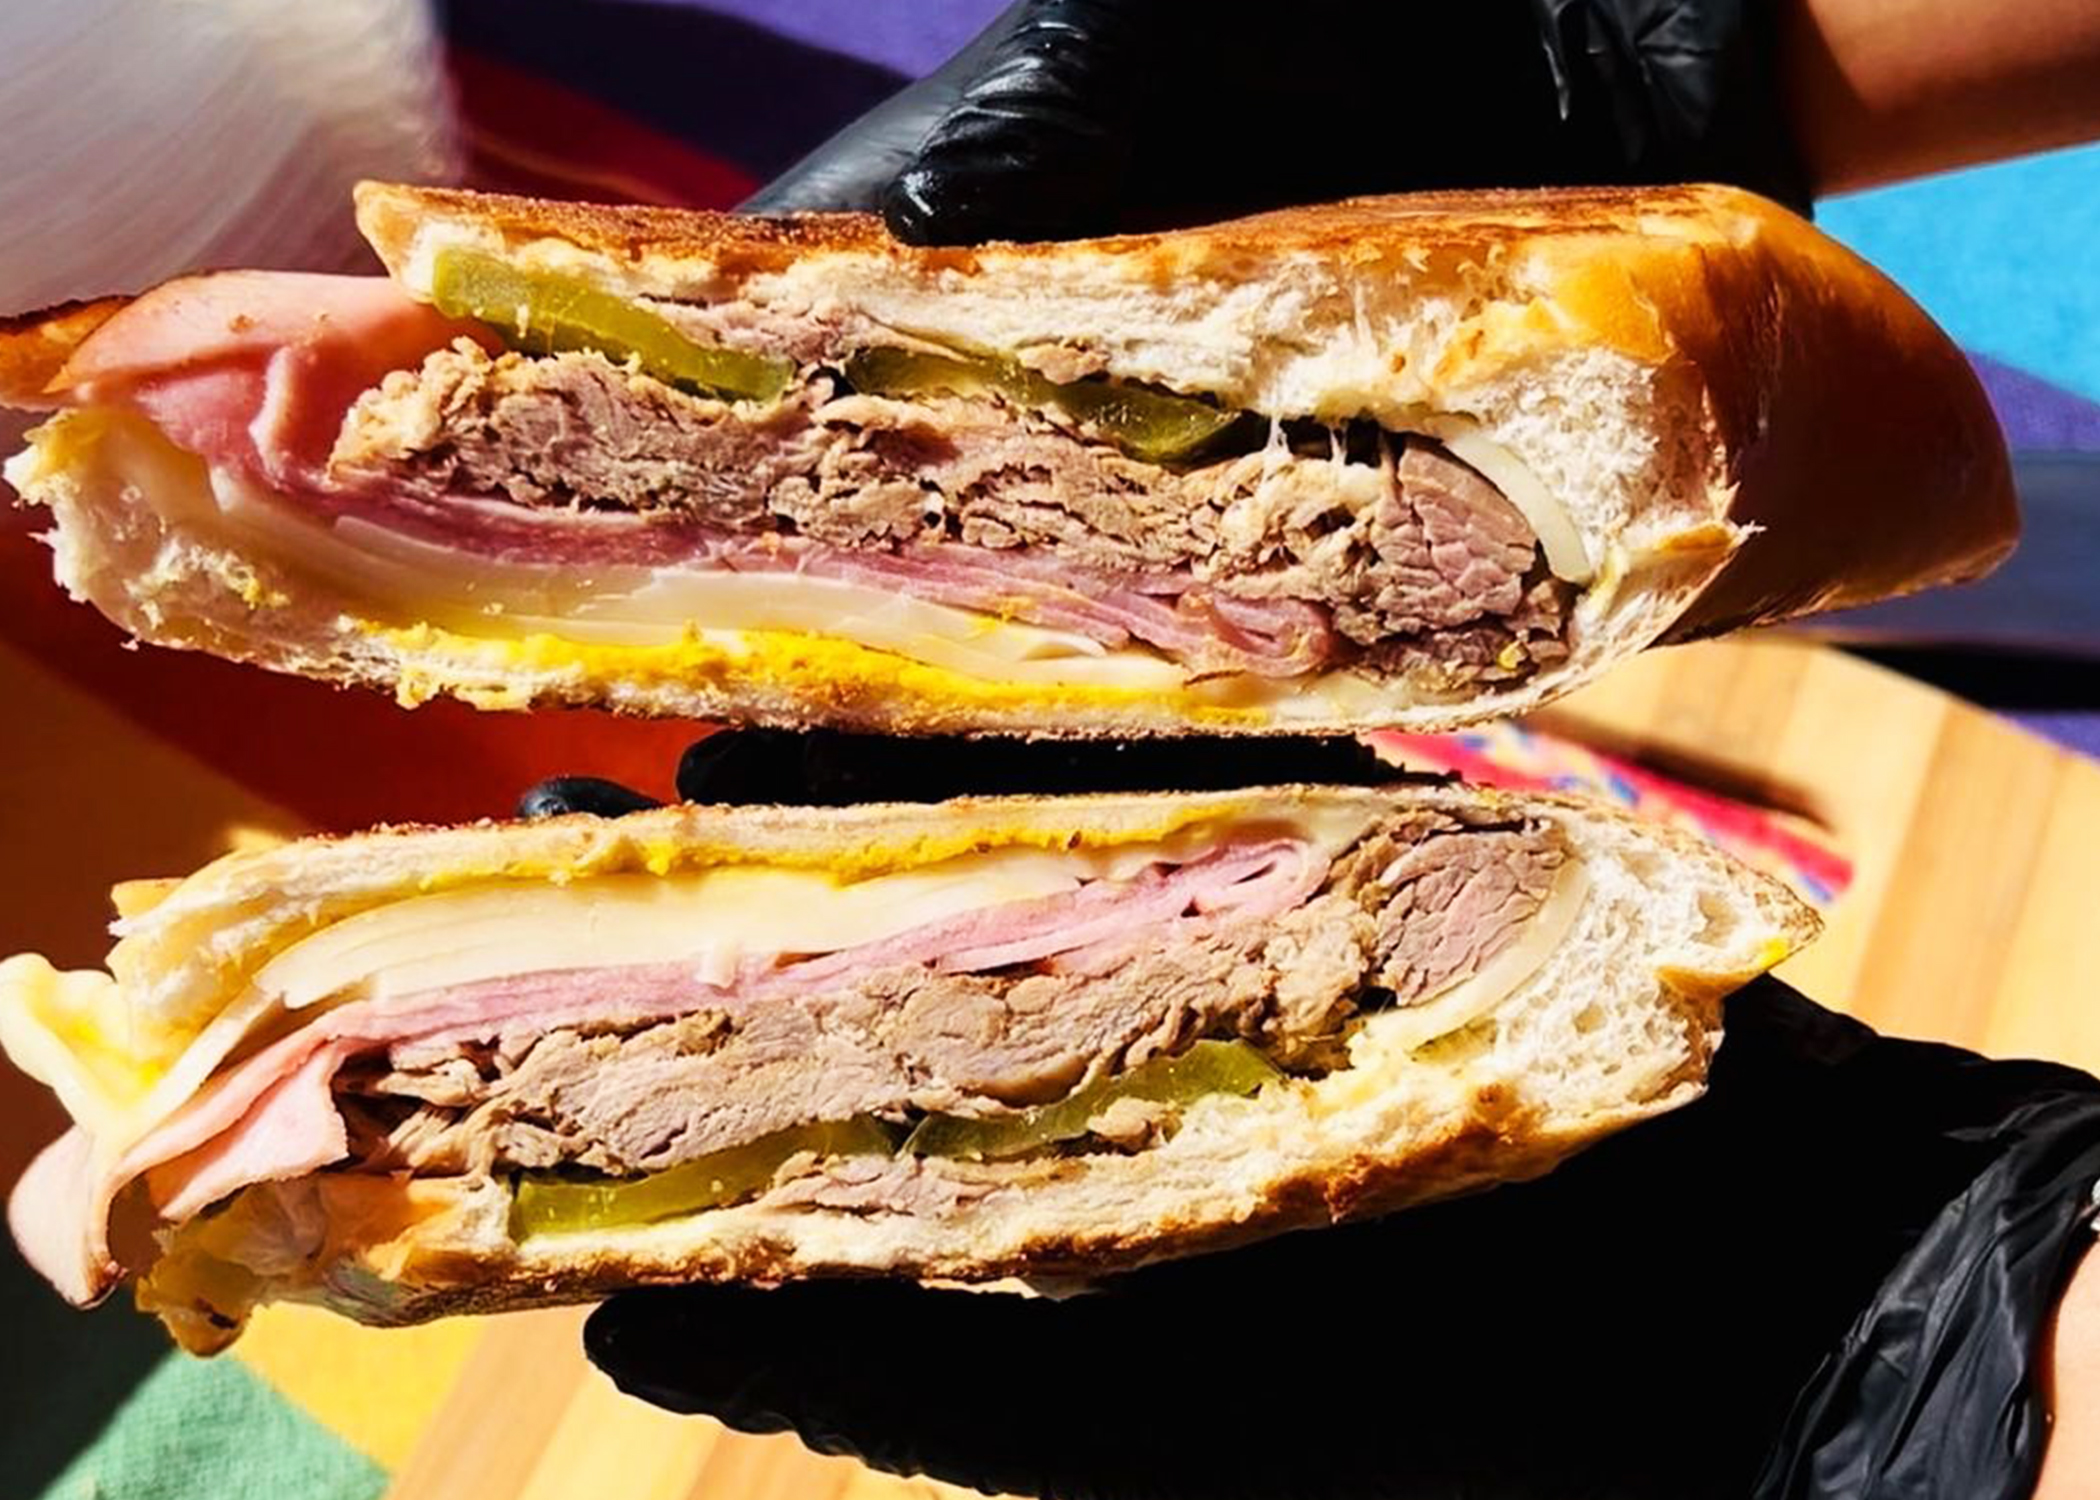 A hand in a black glove holds a meat and cheese sandwich, cut to reveal layers inside.